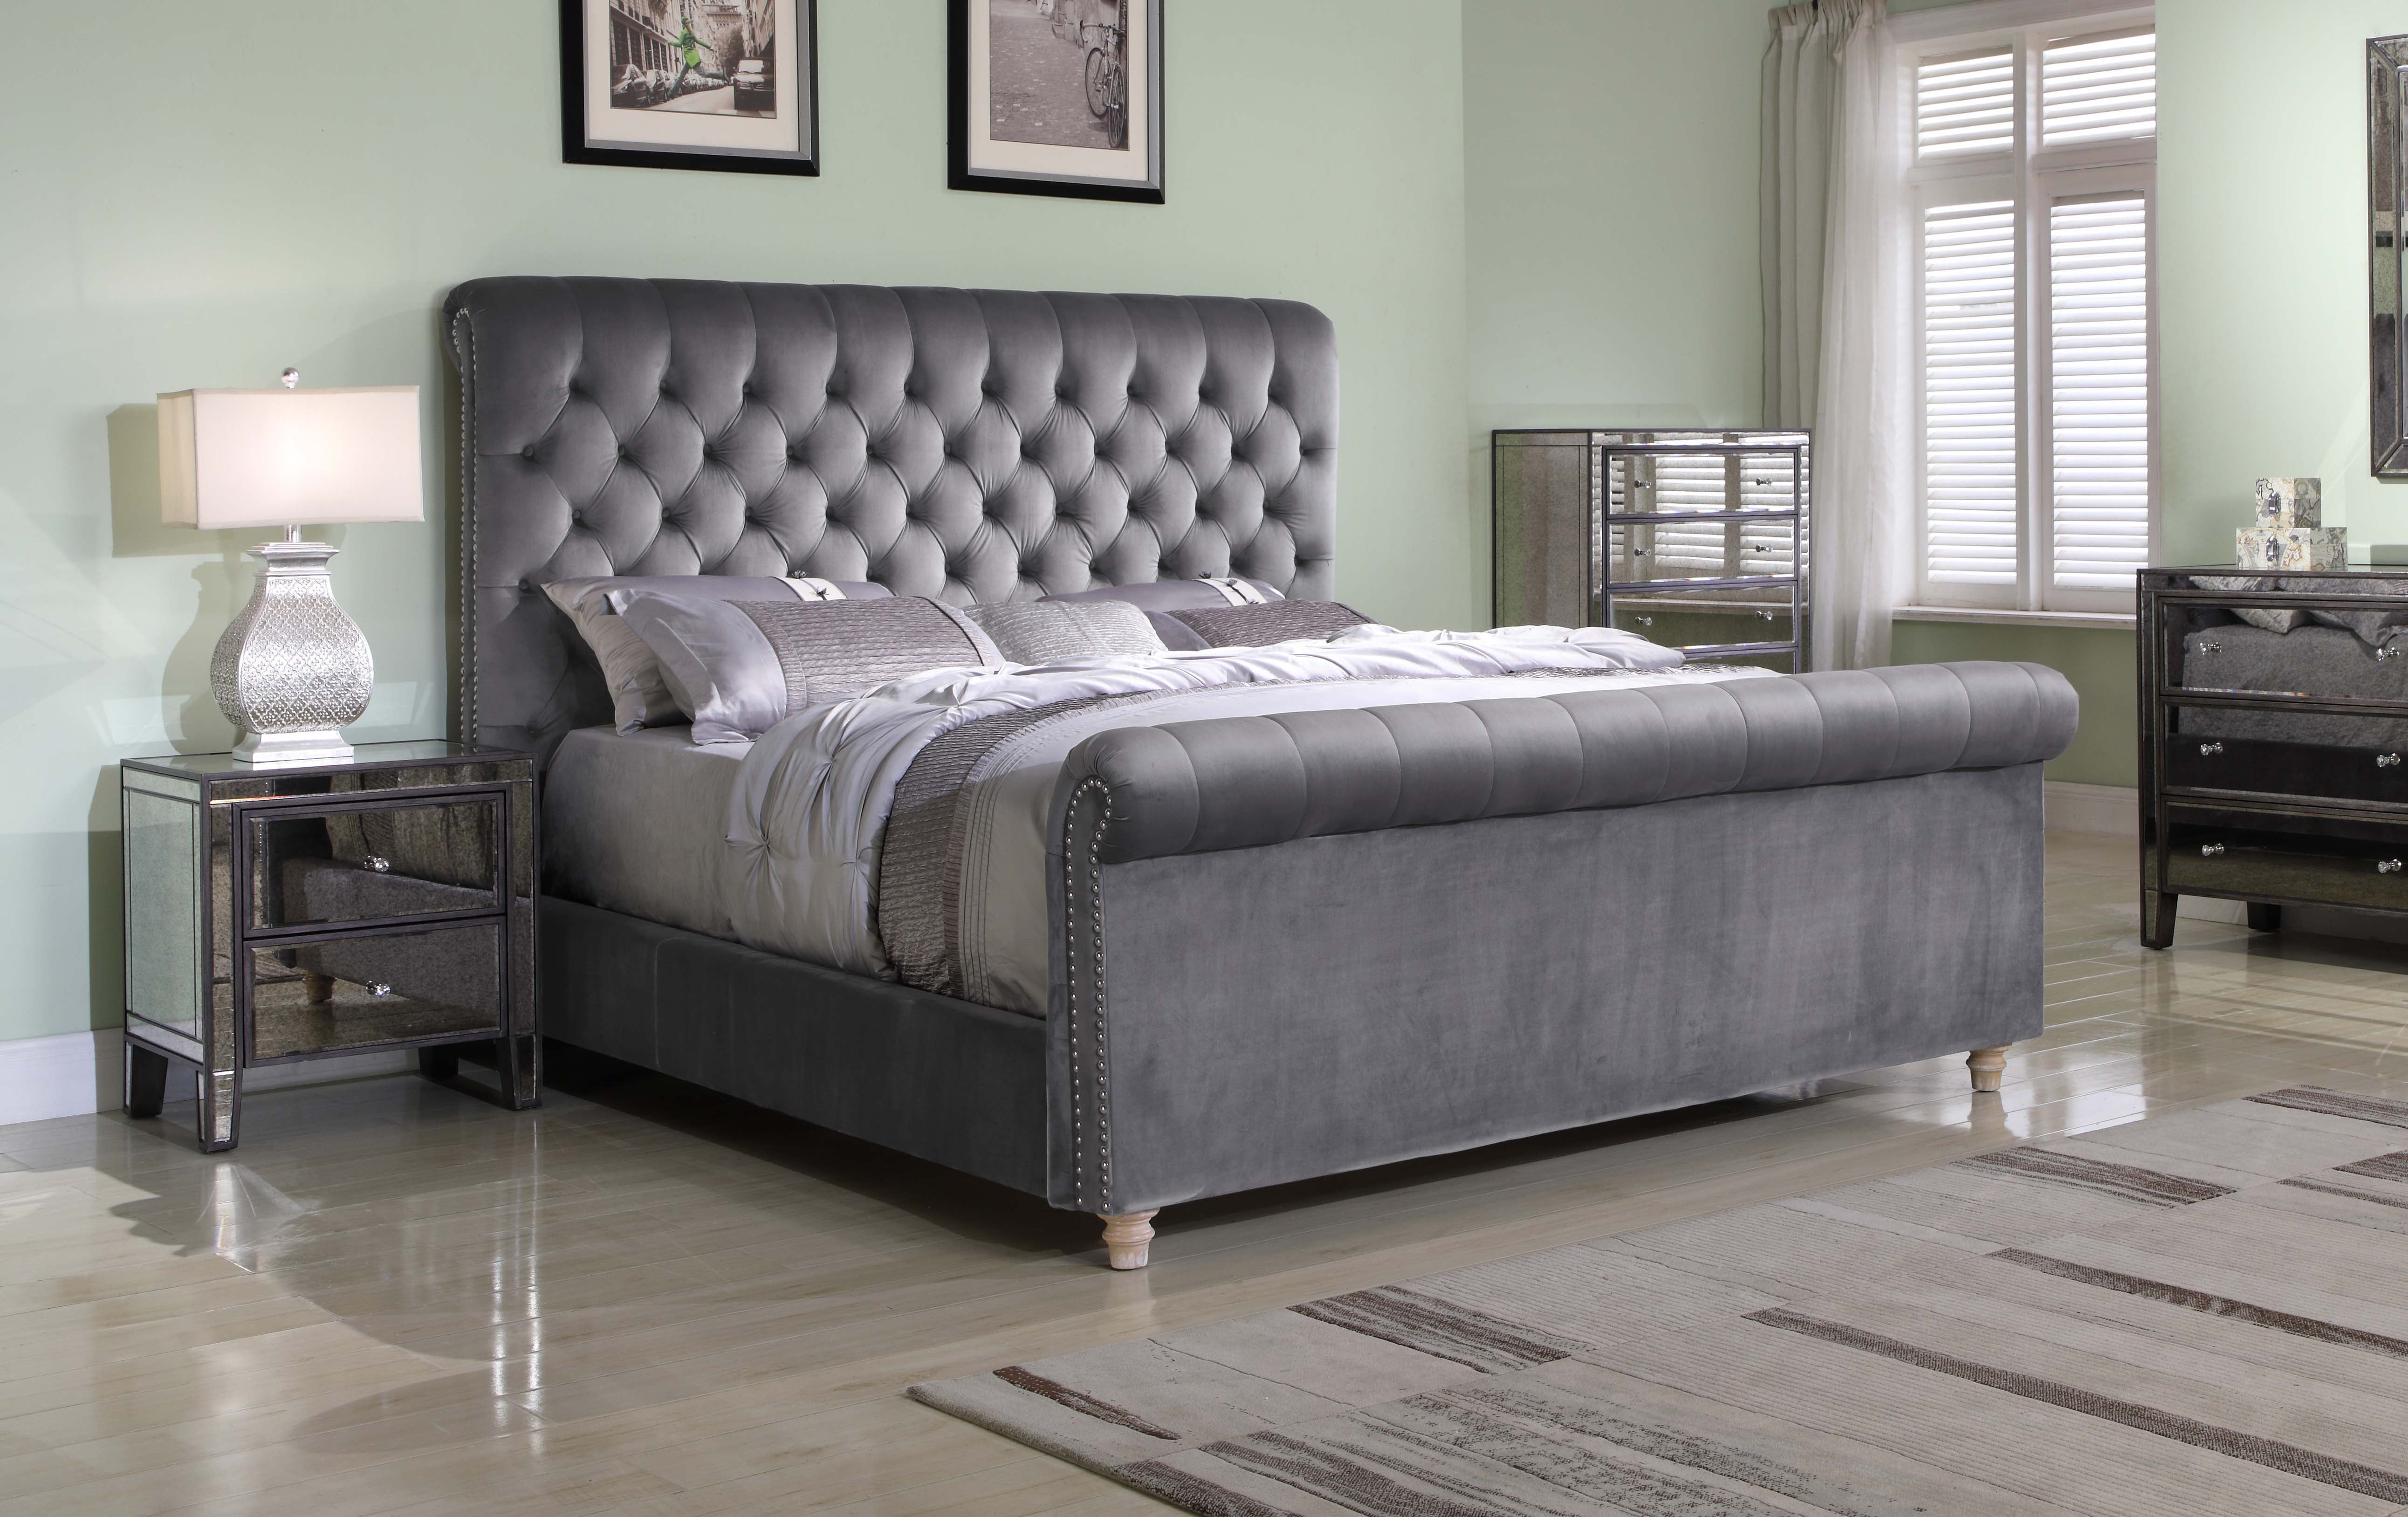 Best Master Furniture Jean Carrie, Roxberry Sleigh Bed Or Headboard